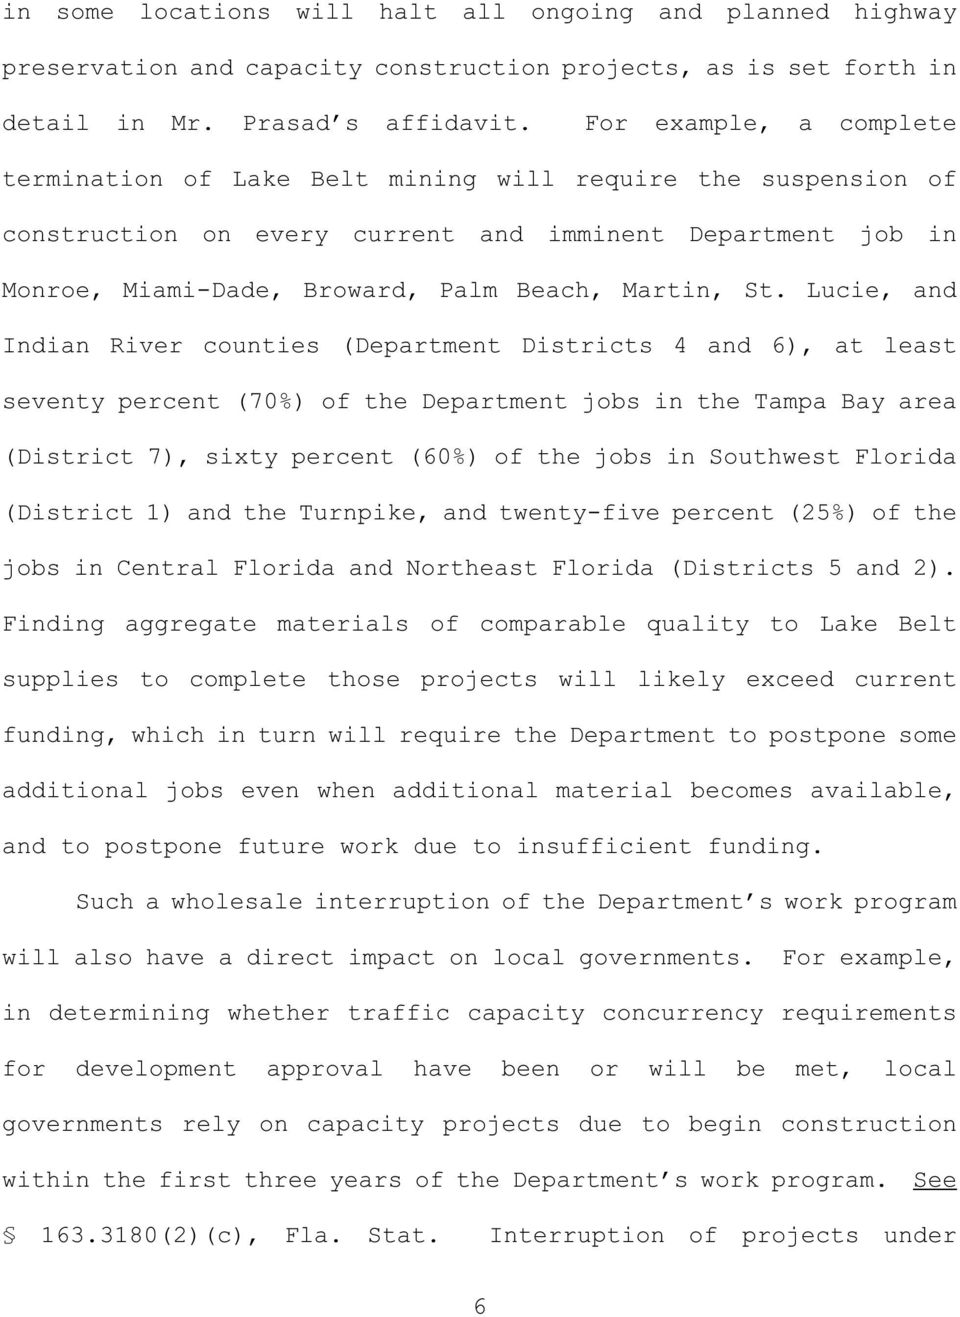 Lucie, and Indian River counties (Department Districts 4 and 6), at least seventy percent (70%) of the Department jobs in the Tampa Bay area (District 7), sixty percent (60%) of the jobs in Southwest